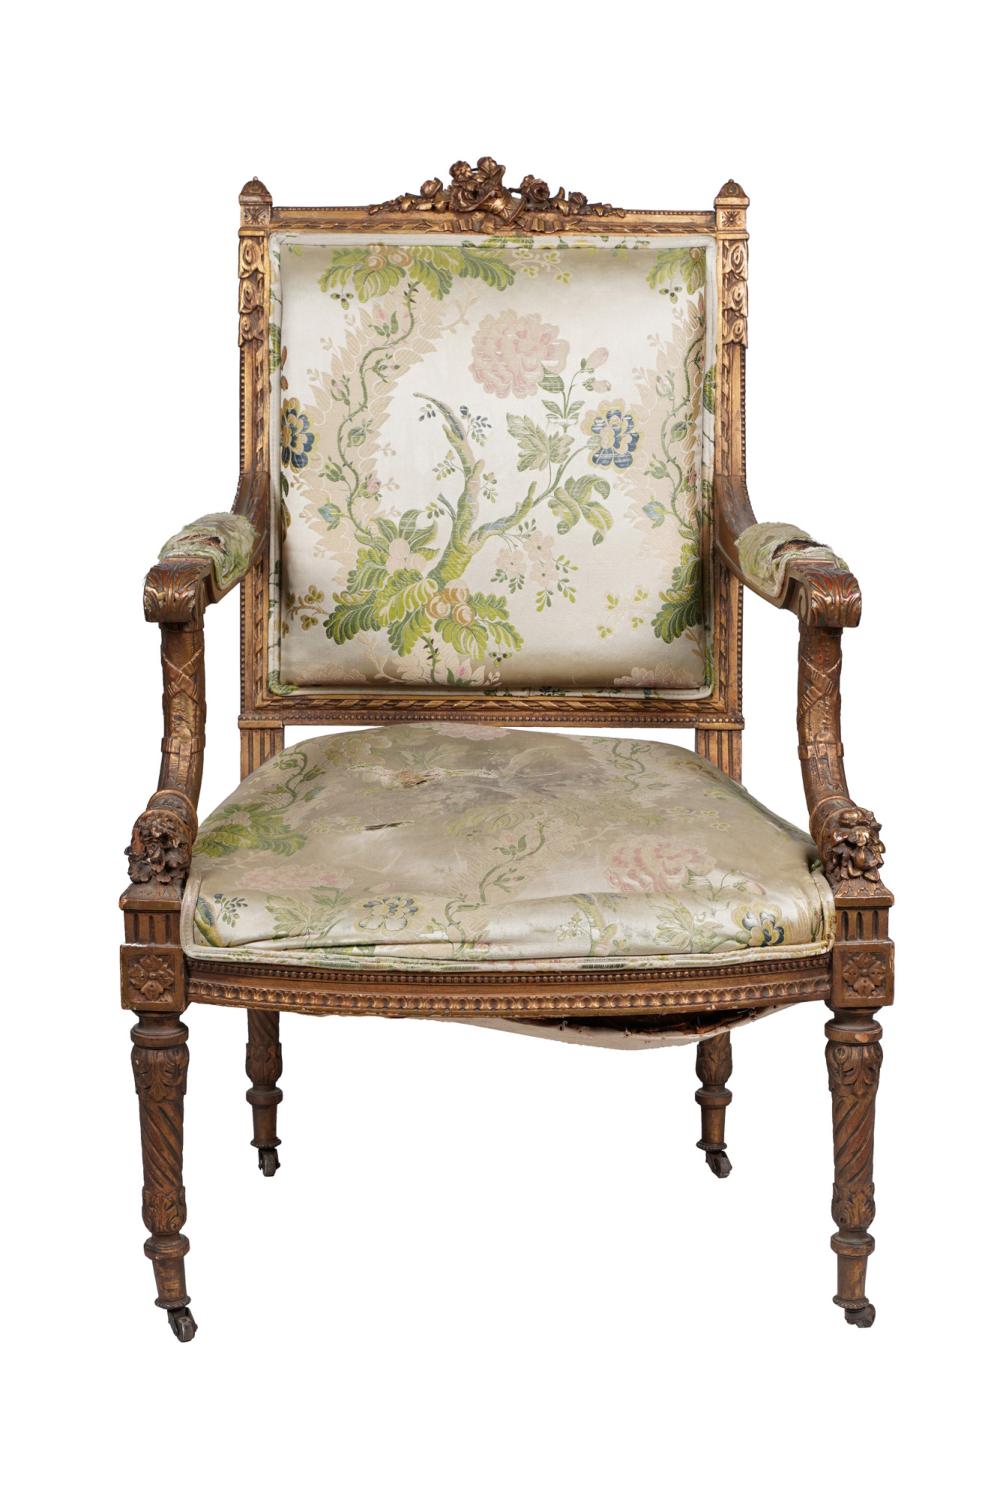 FRENCH GILTWOOD FAUTEUIL FRAMEin